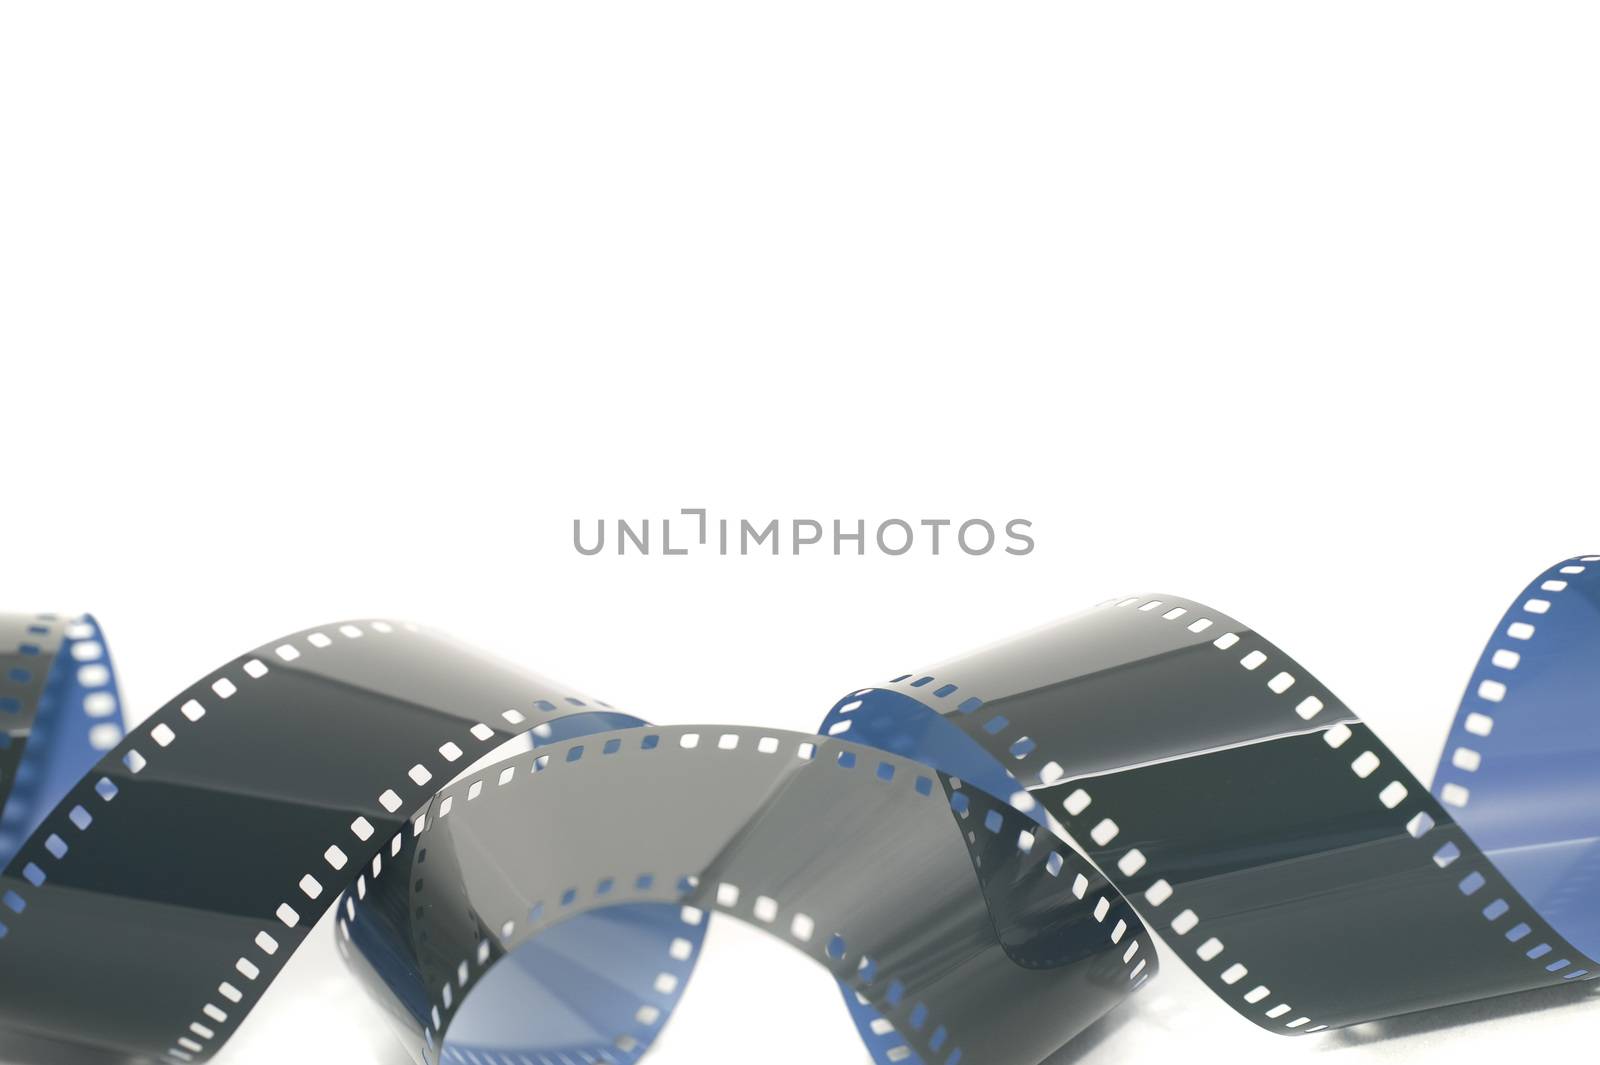 Coiled strip of 35mm photographic film by stockarch